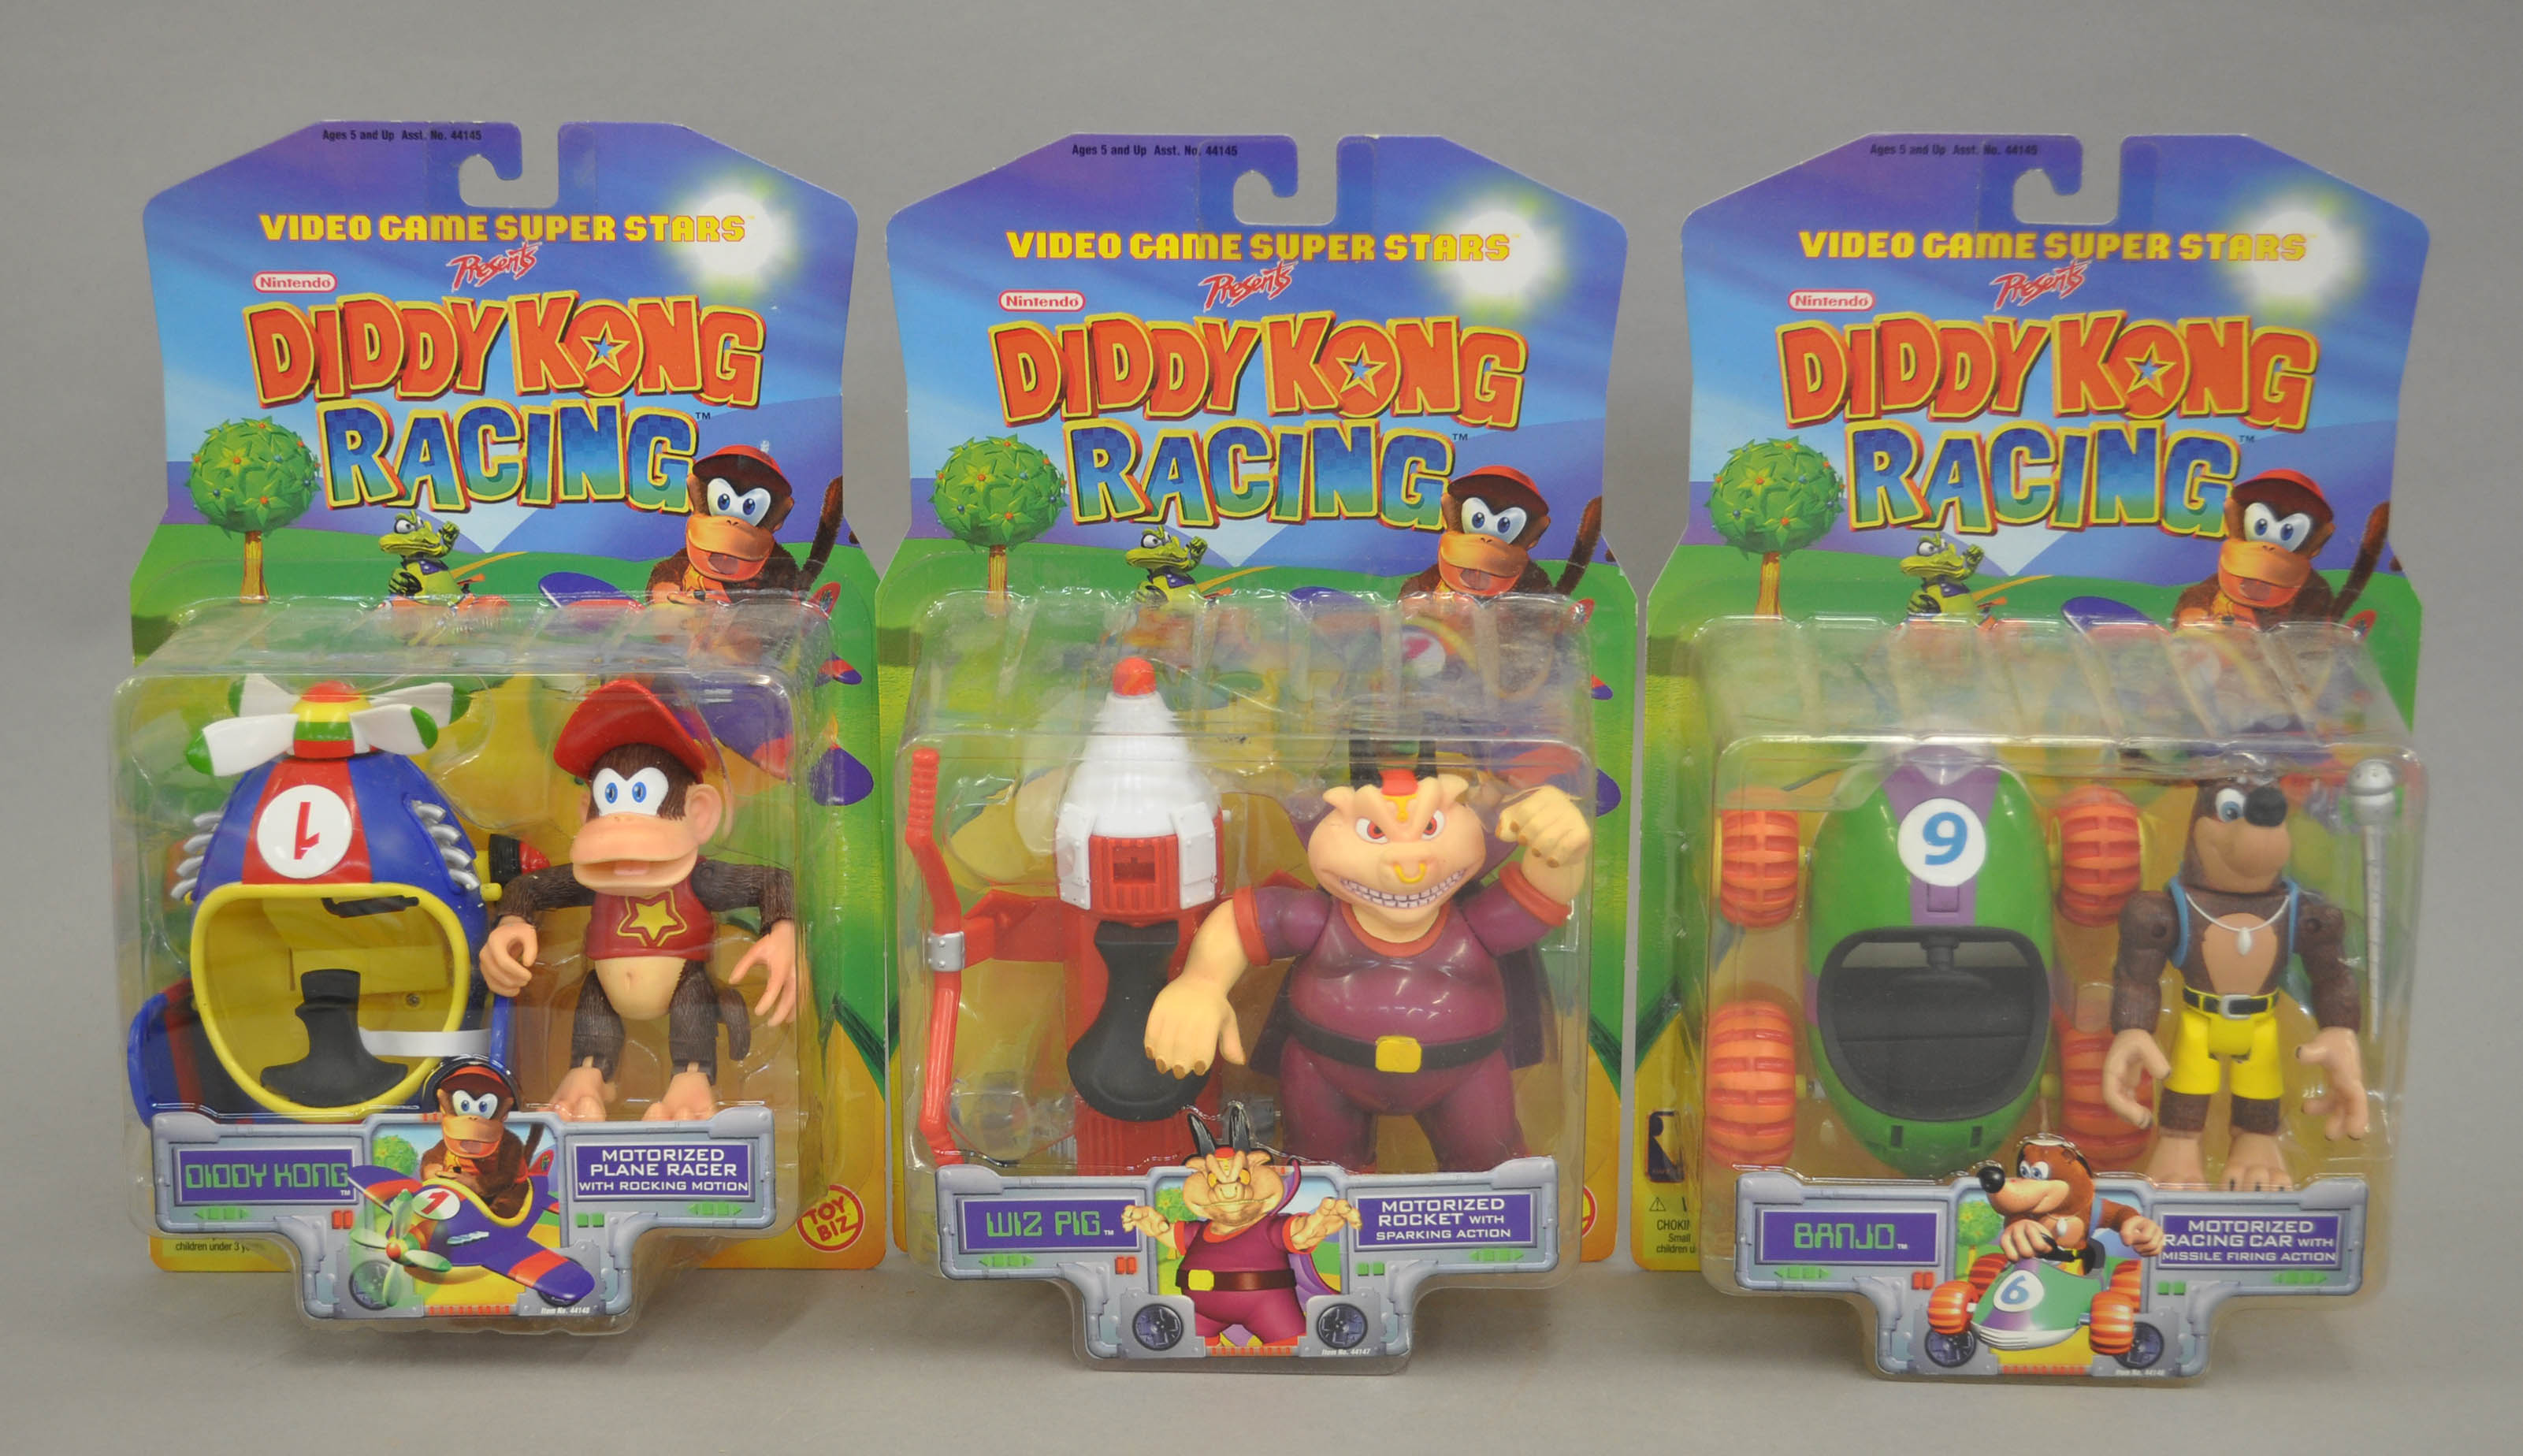 Complete set of three Toy Biz Video Game Super Stars Diddy Kong Racing action figures: Wiz Pig;